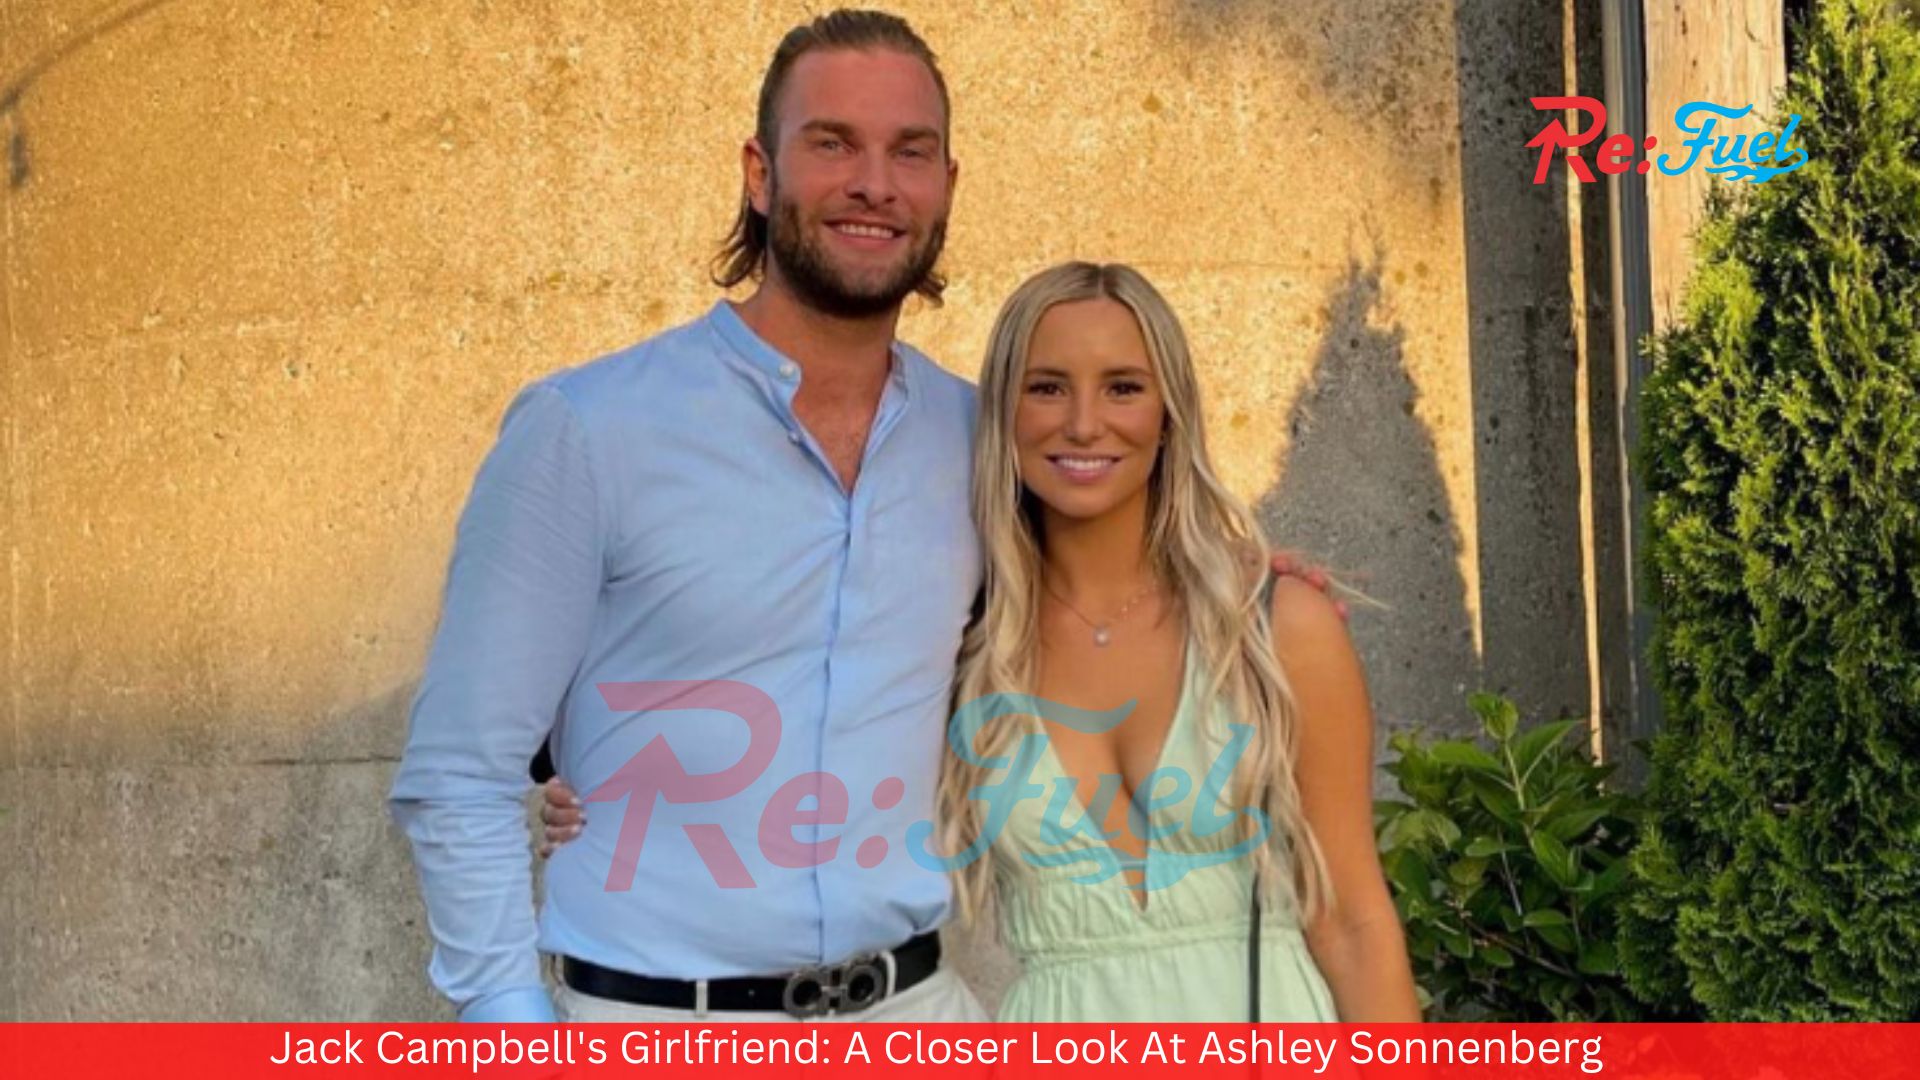 Jack Campbell's Girlfriend: A Closer Look At Ashley Sonnenberg